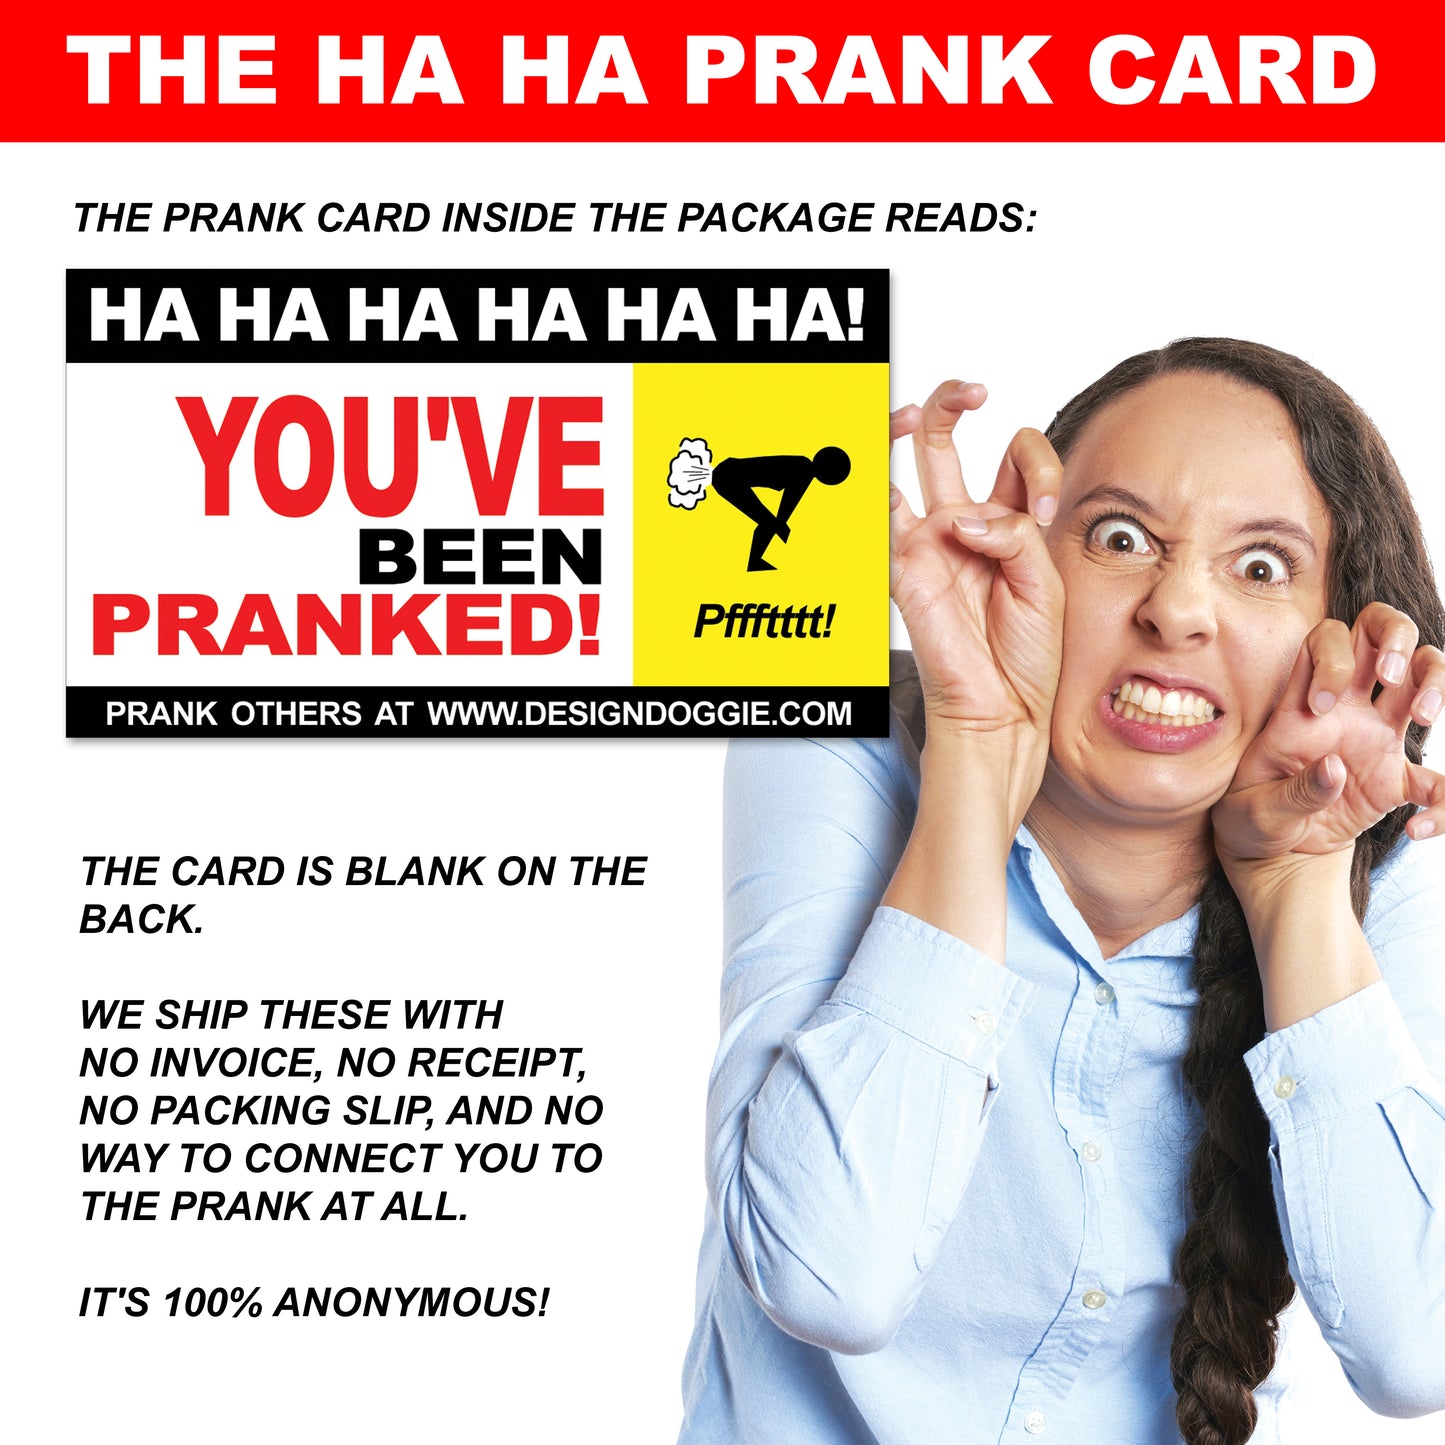 Welcome to the Republican Party embarrassing prank box gets mailed directly to your victims 100% anonymously!